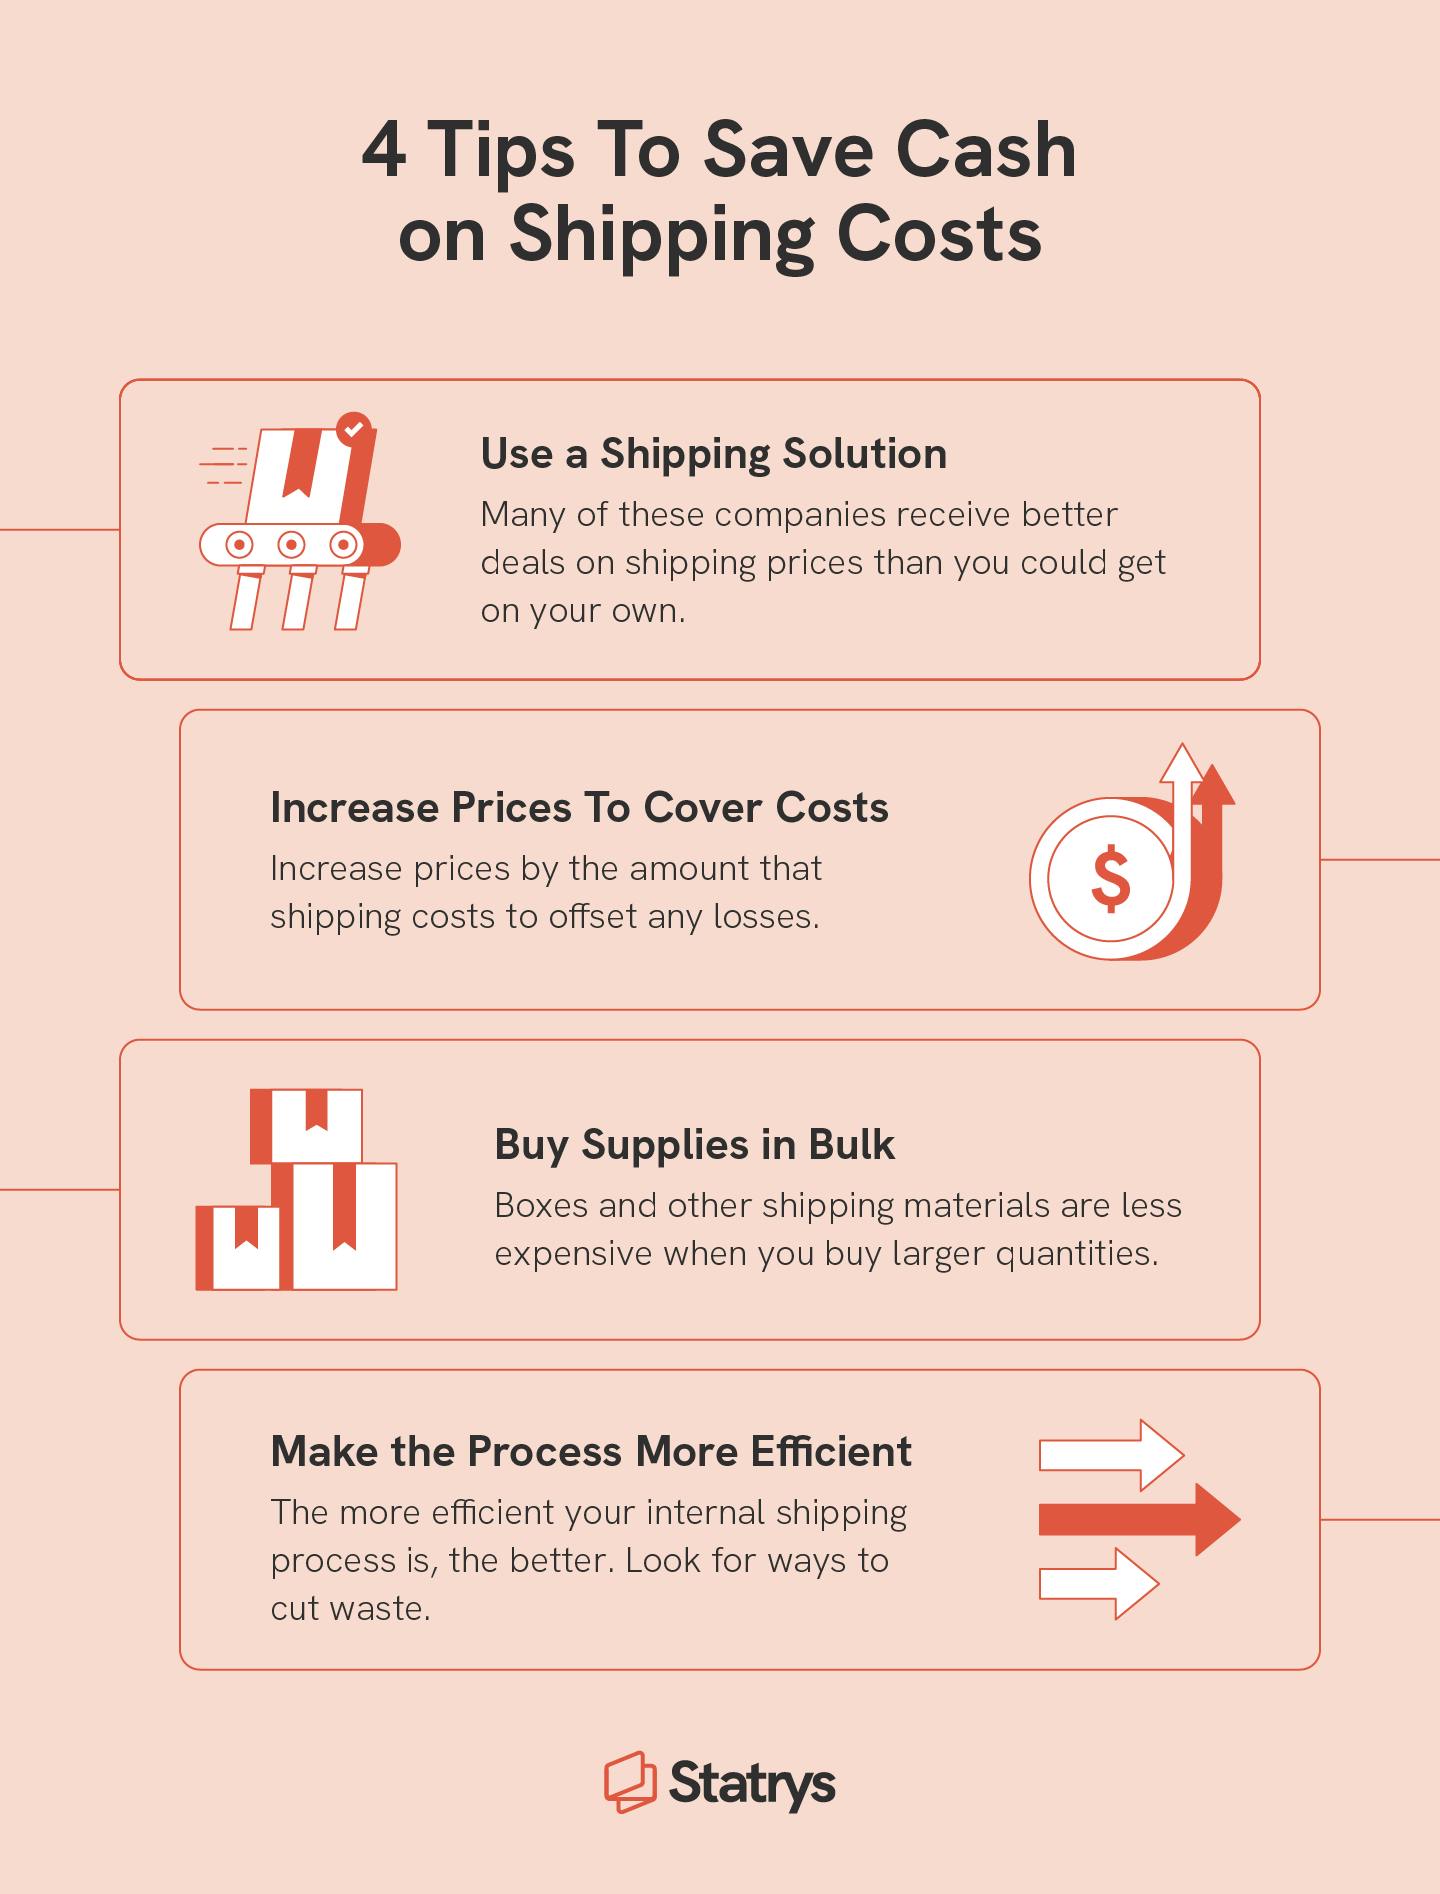 8 Tips to Reduce Shipping Costs and Speed Up Delivery